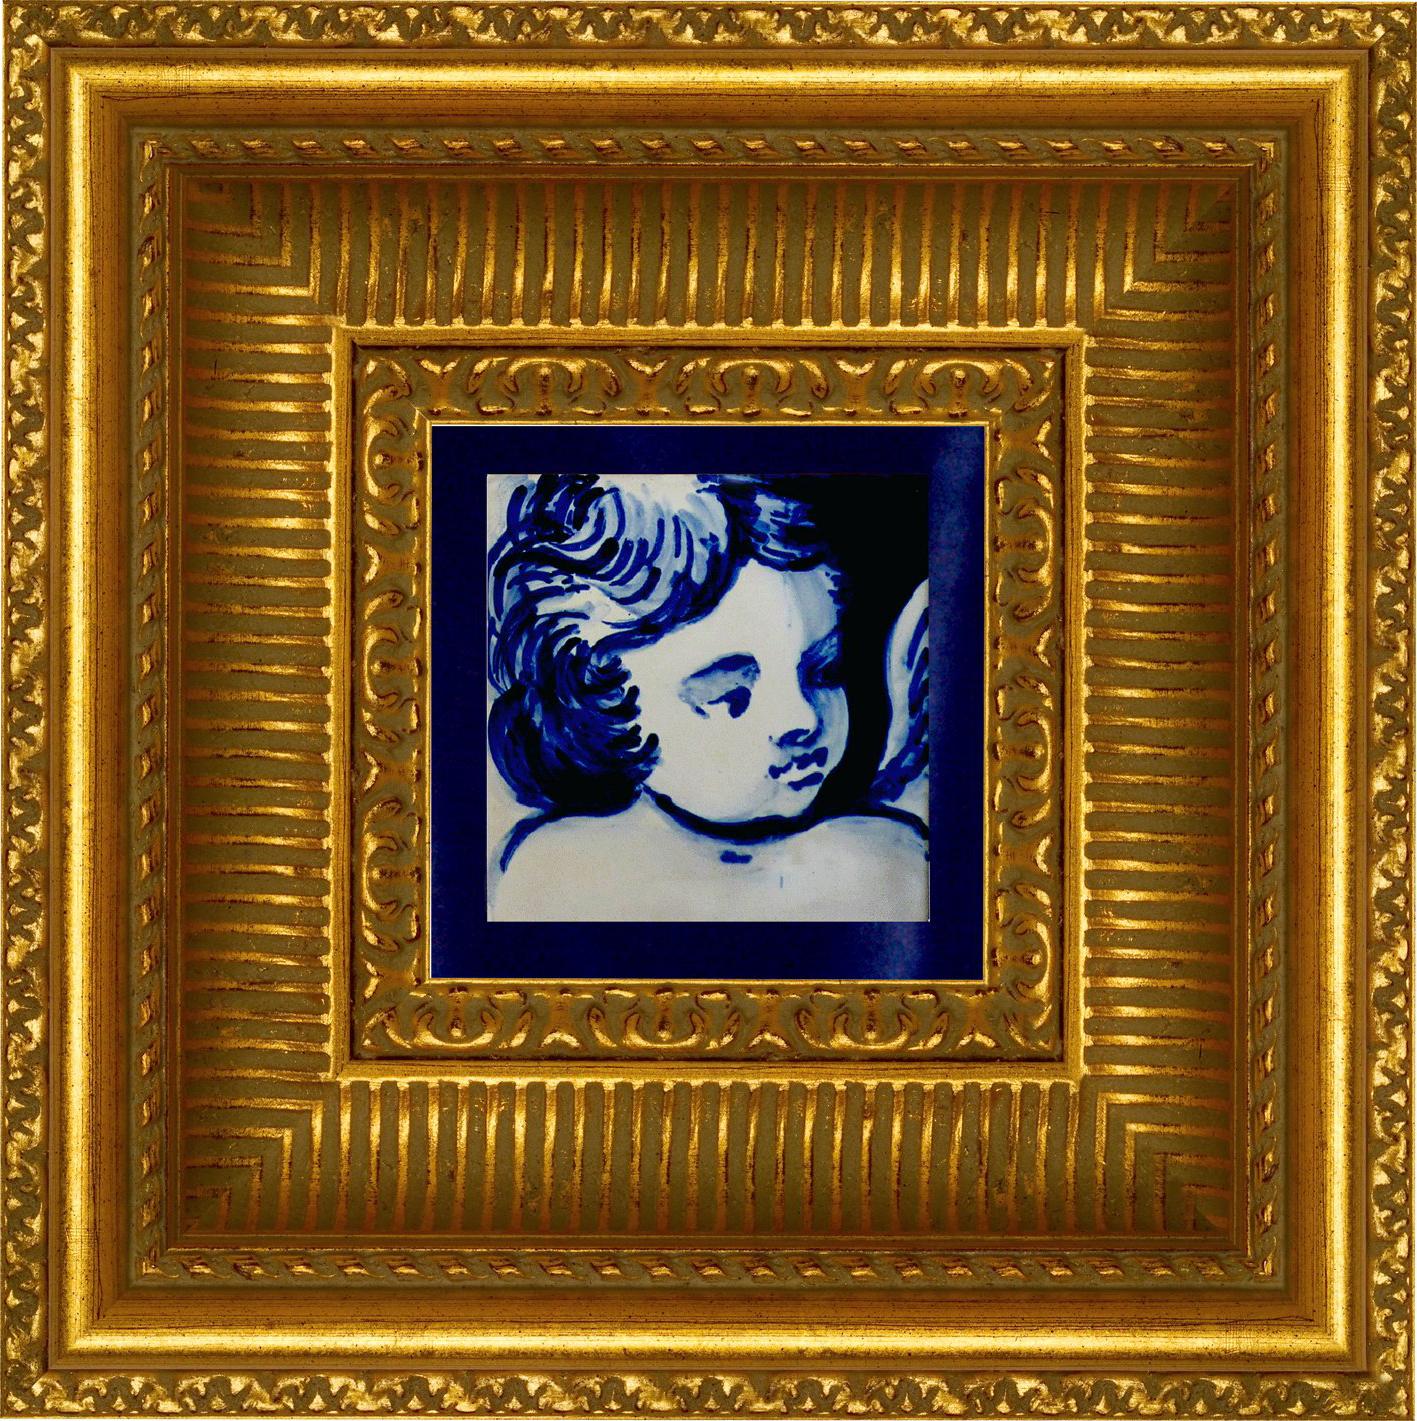 Gorgeous blue hand-painted baroque cherub or angel 18th century style Portuguese ceramic tile/Azulejo.
The tile painted in cobalt blue over white in typical 18th century Portugal set the taste for monumental ceramic tile applications in churches